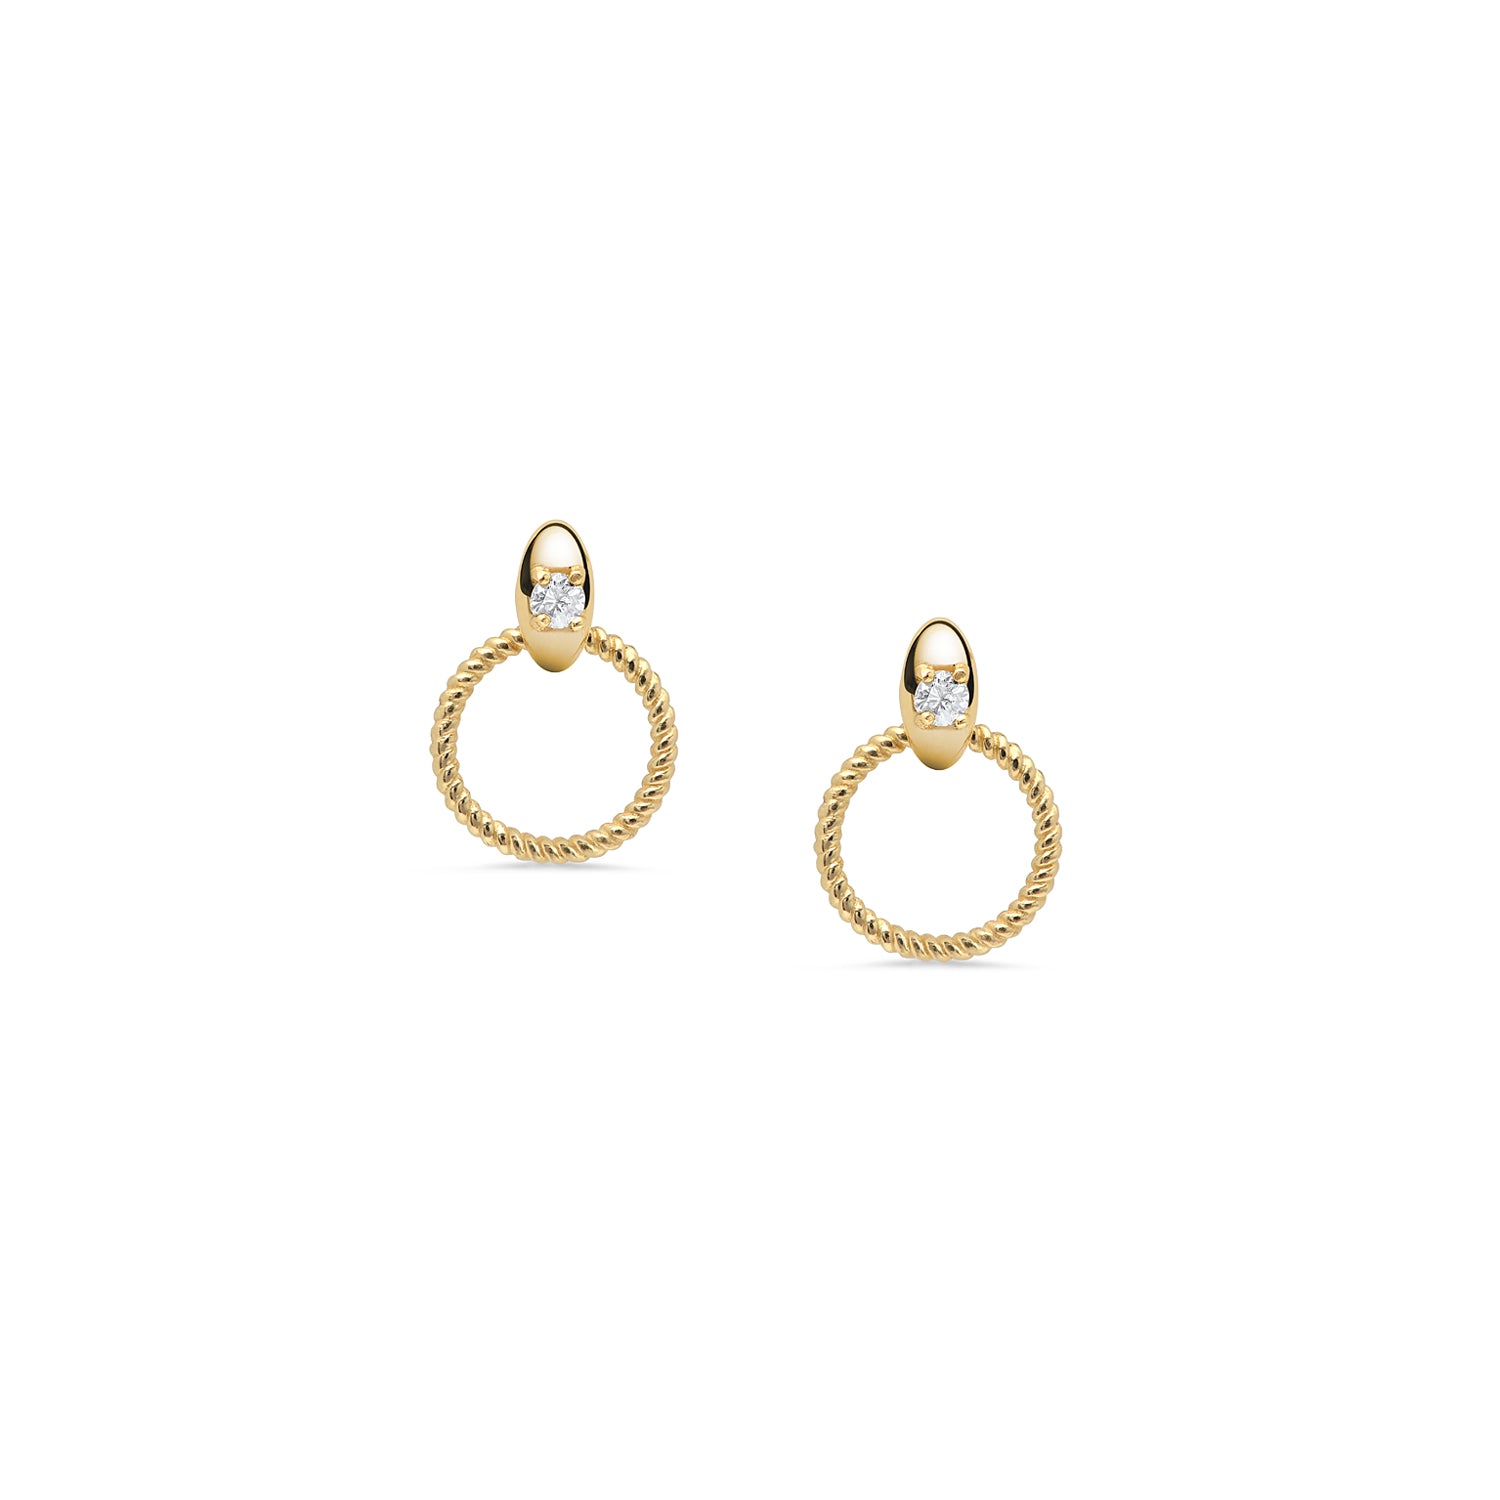 Are You Am I - Thysa FINE Earring